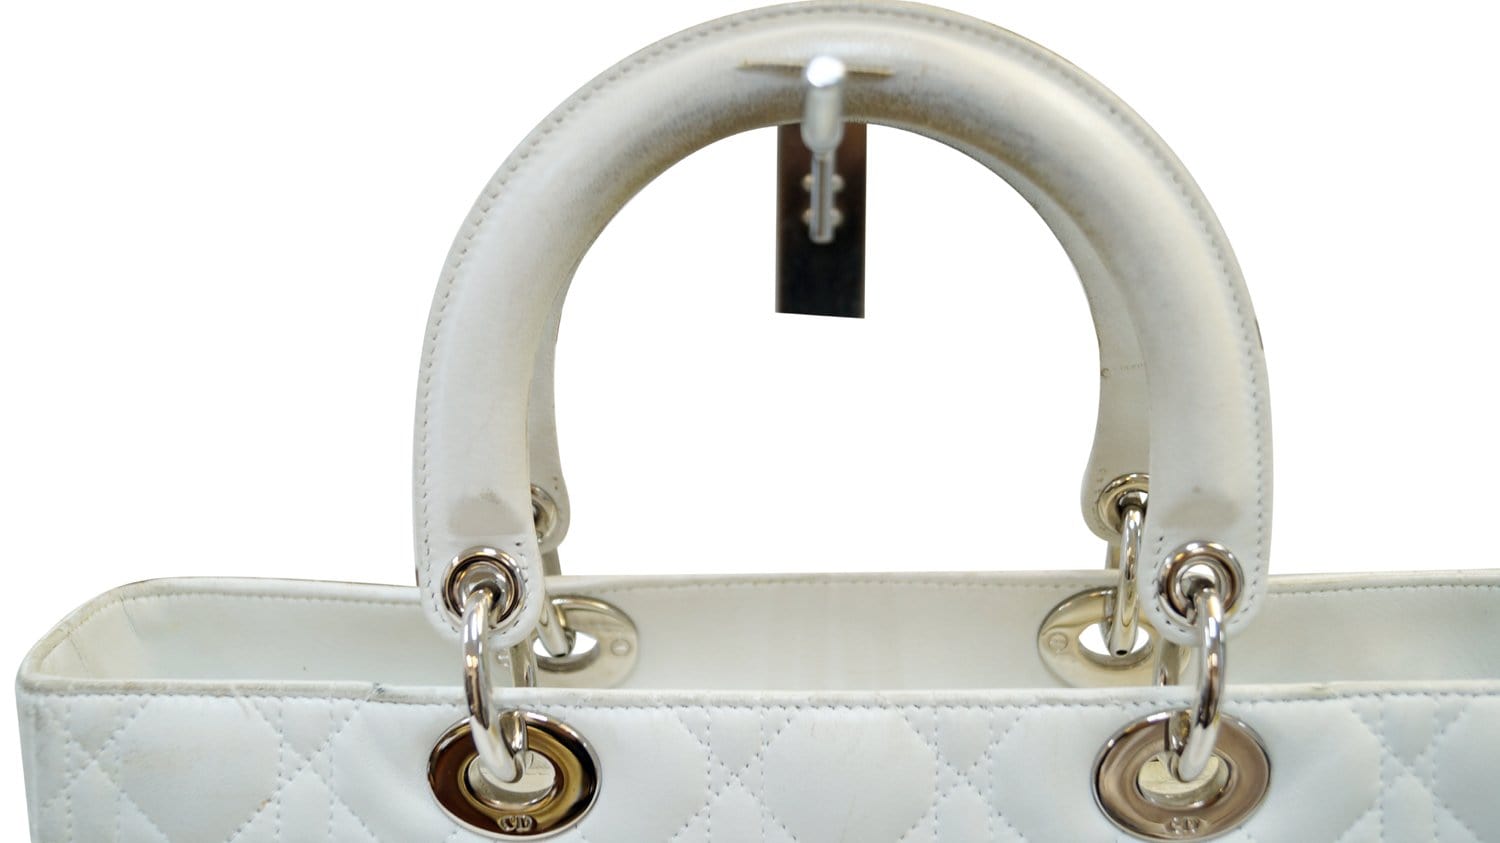 Lady dior leather handbag Dior White in Leather - 24852425